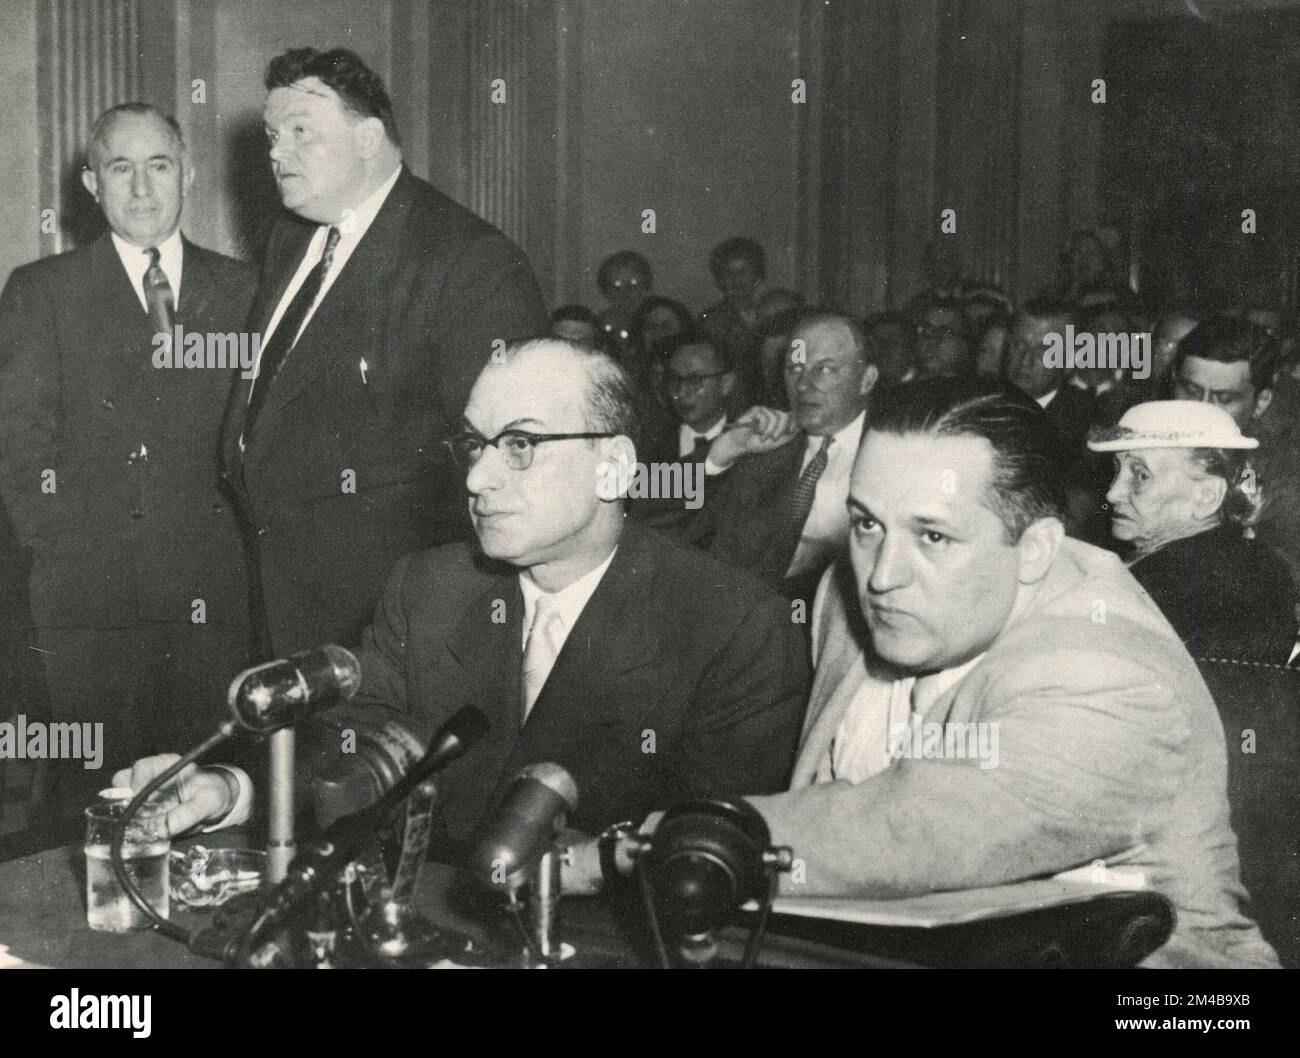 Italian-American gangster and mafia mobster Anthony Strollo aka Tony Bender (right) testifying in court, USA 1950s Stock Photo